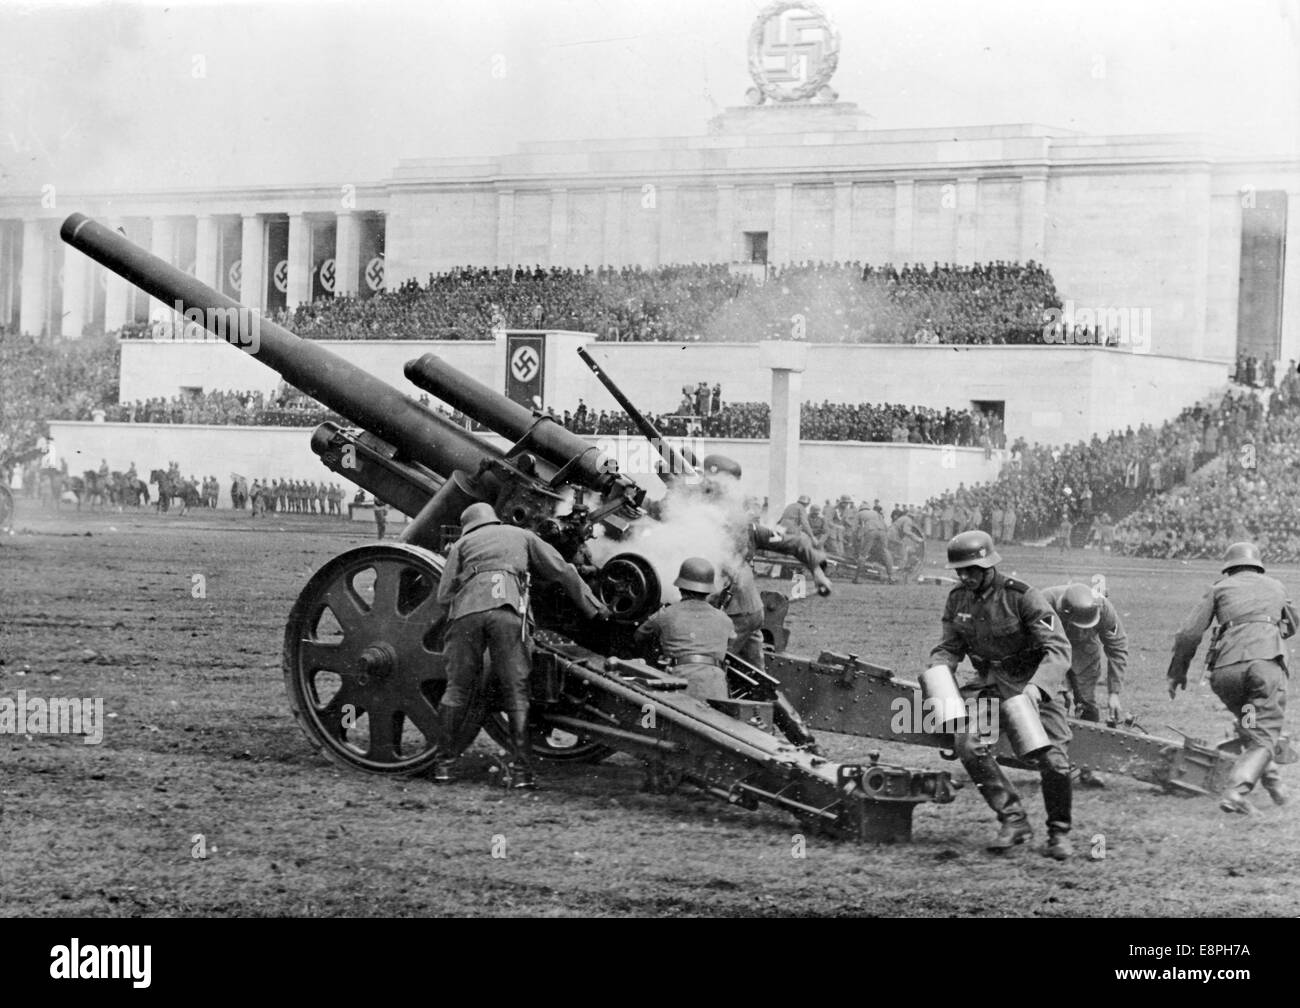 Nuremberg Rally 1937 in Nuremberg, Germany - Nazi party rally grounds - Demonstration by the German Wehrmacht on Zeppelin Field, here artillery in front of the main stand. (Flaws in quality due to the historic picture copy) Fotoarchiv für Zeitgeschichtee - NO WIRE SERVICE - Stock Photo